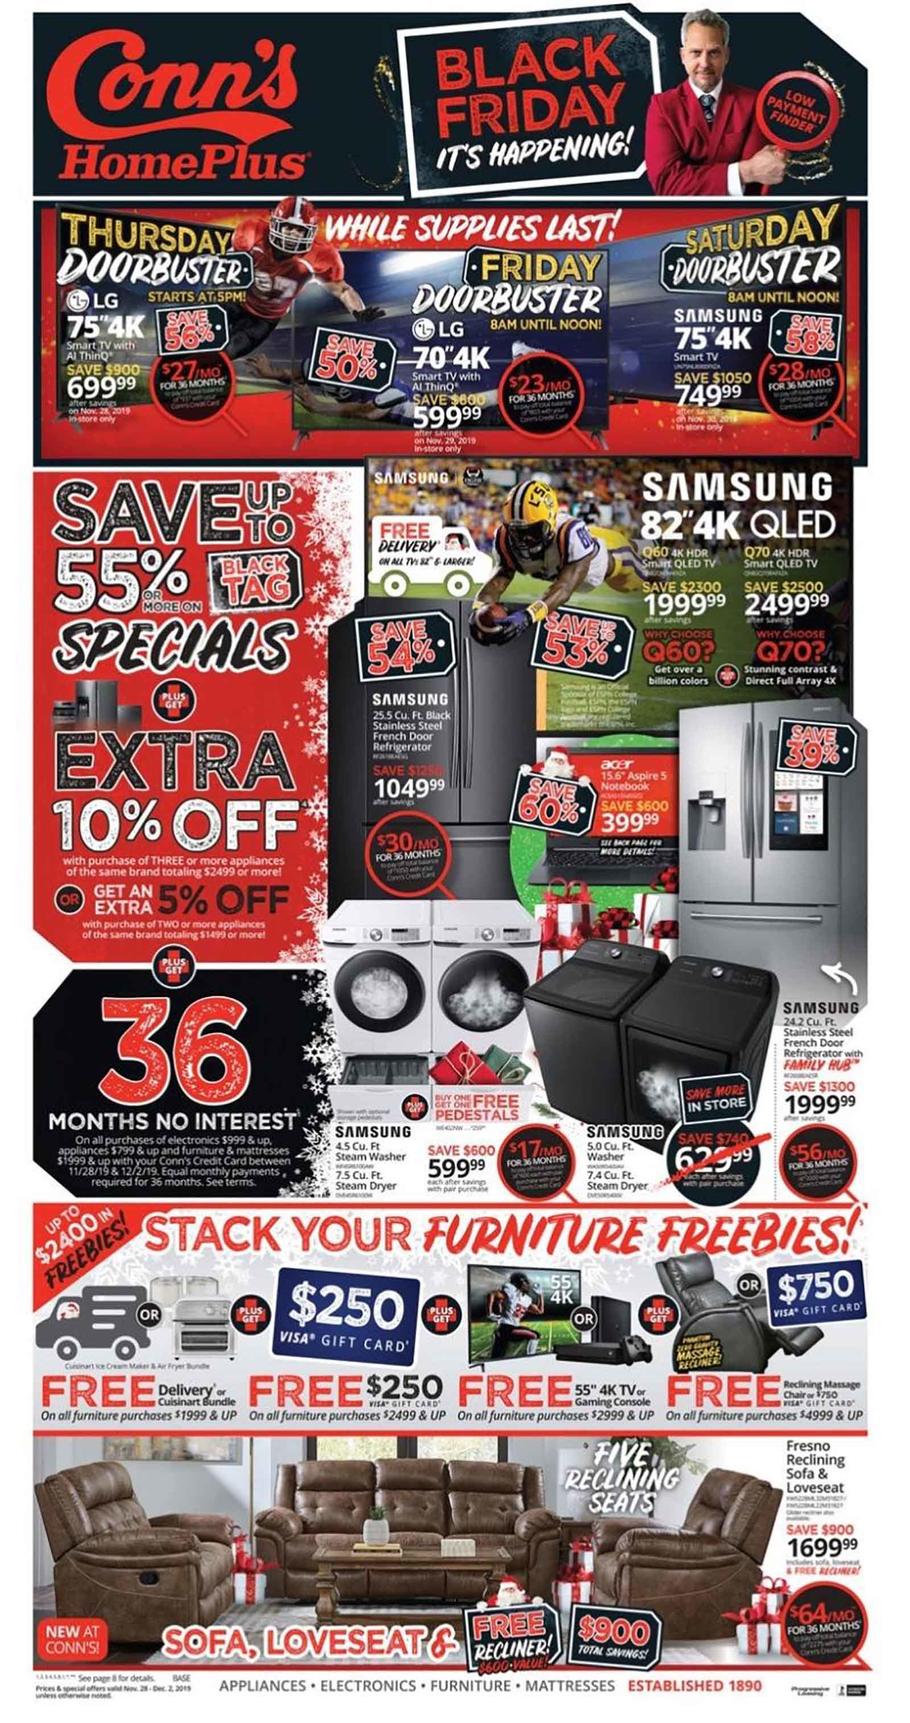 Conn's HomePlus Black Friday Ad Scan 2019